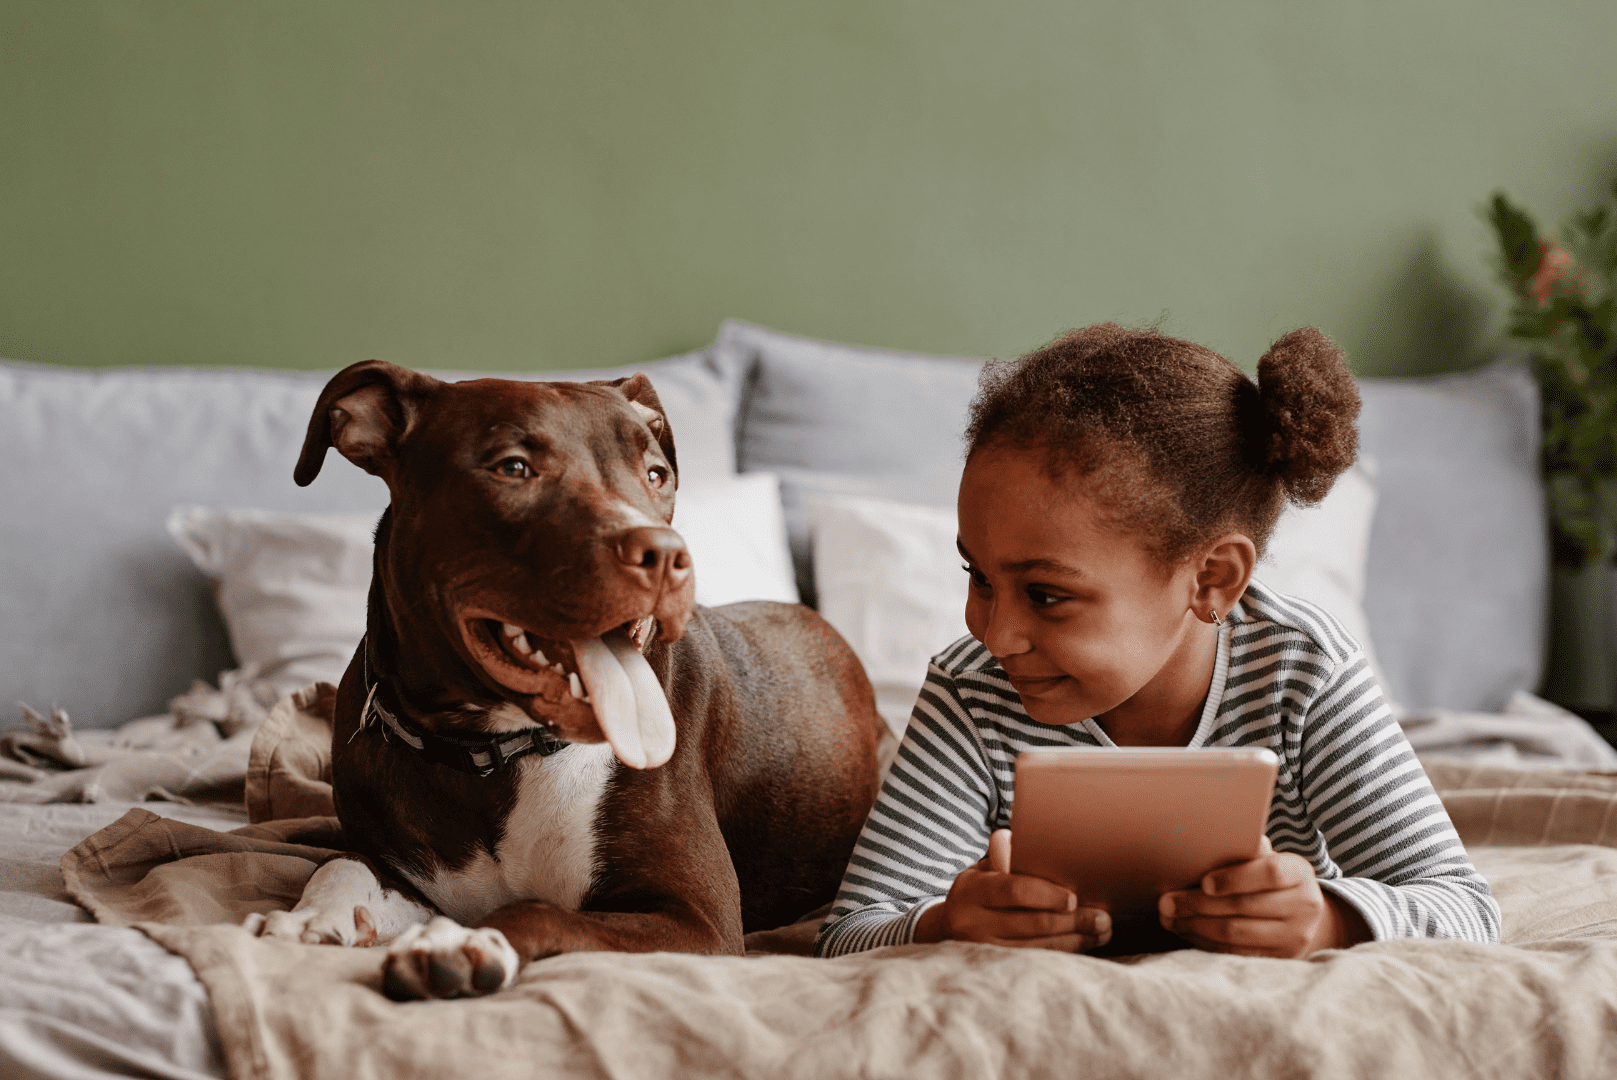 photograph of young girl reading in bed smiling at her pitbull dog lying next to her to illustrate concept of therapy dogs